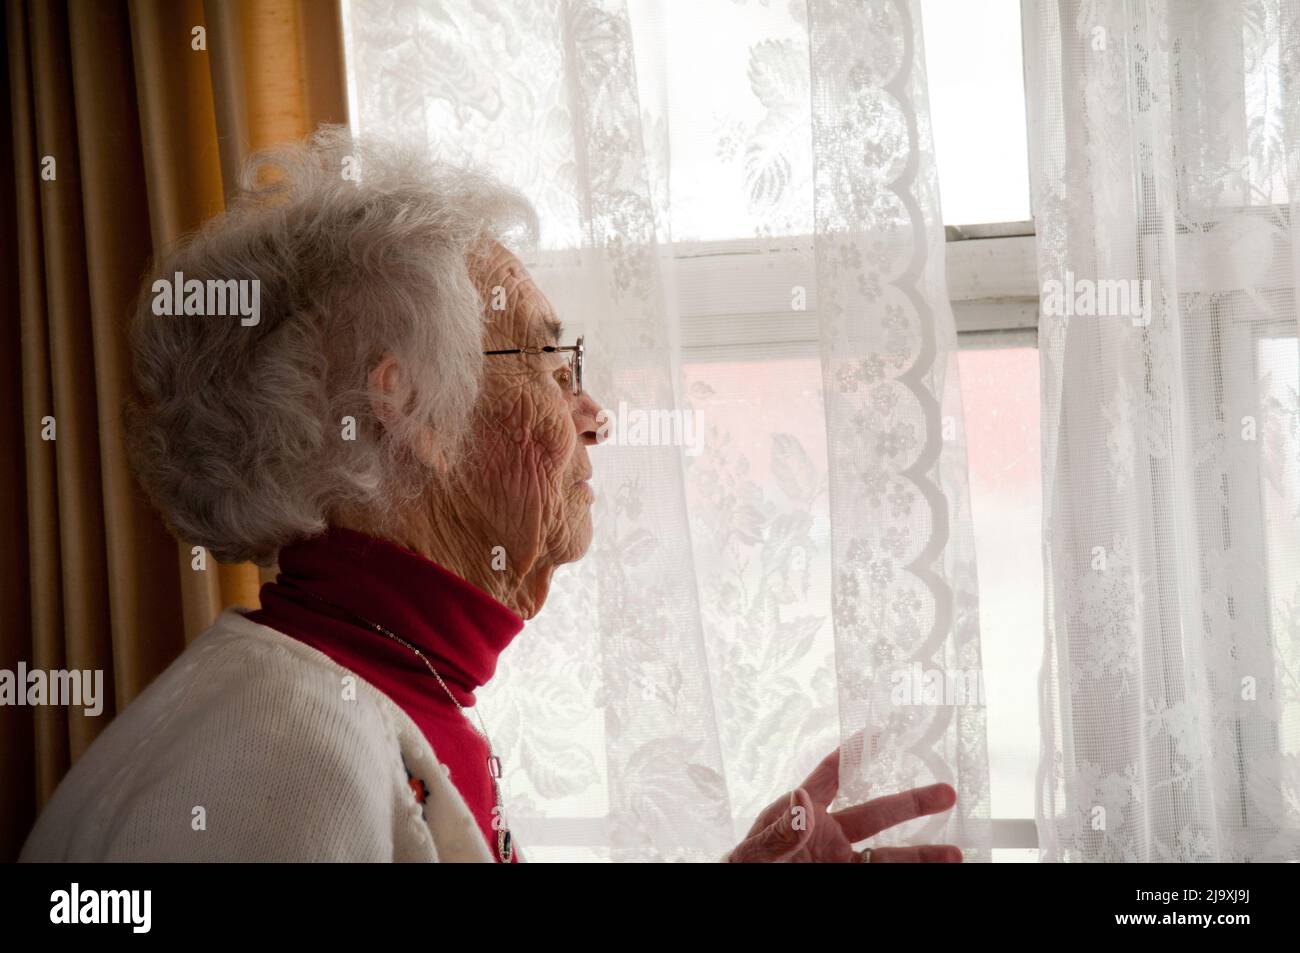 Elderly woman looking out of window Stock Photo